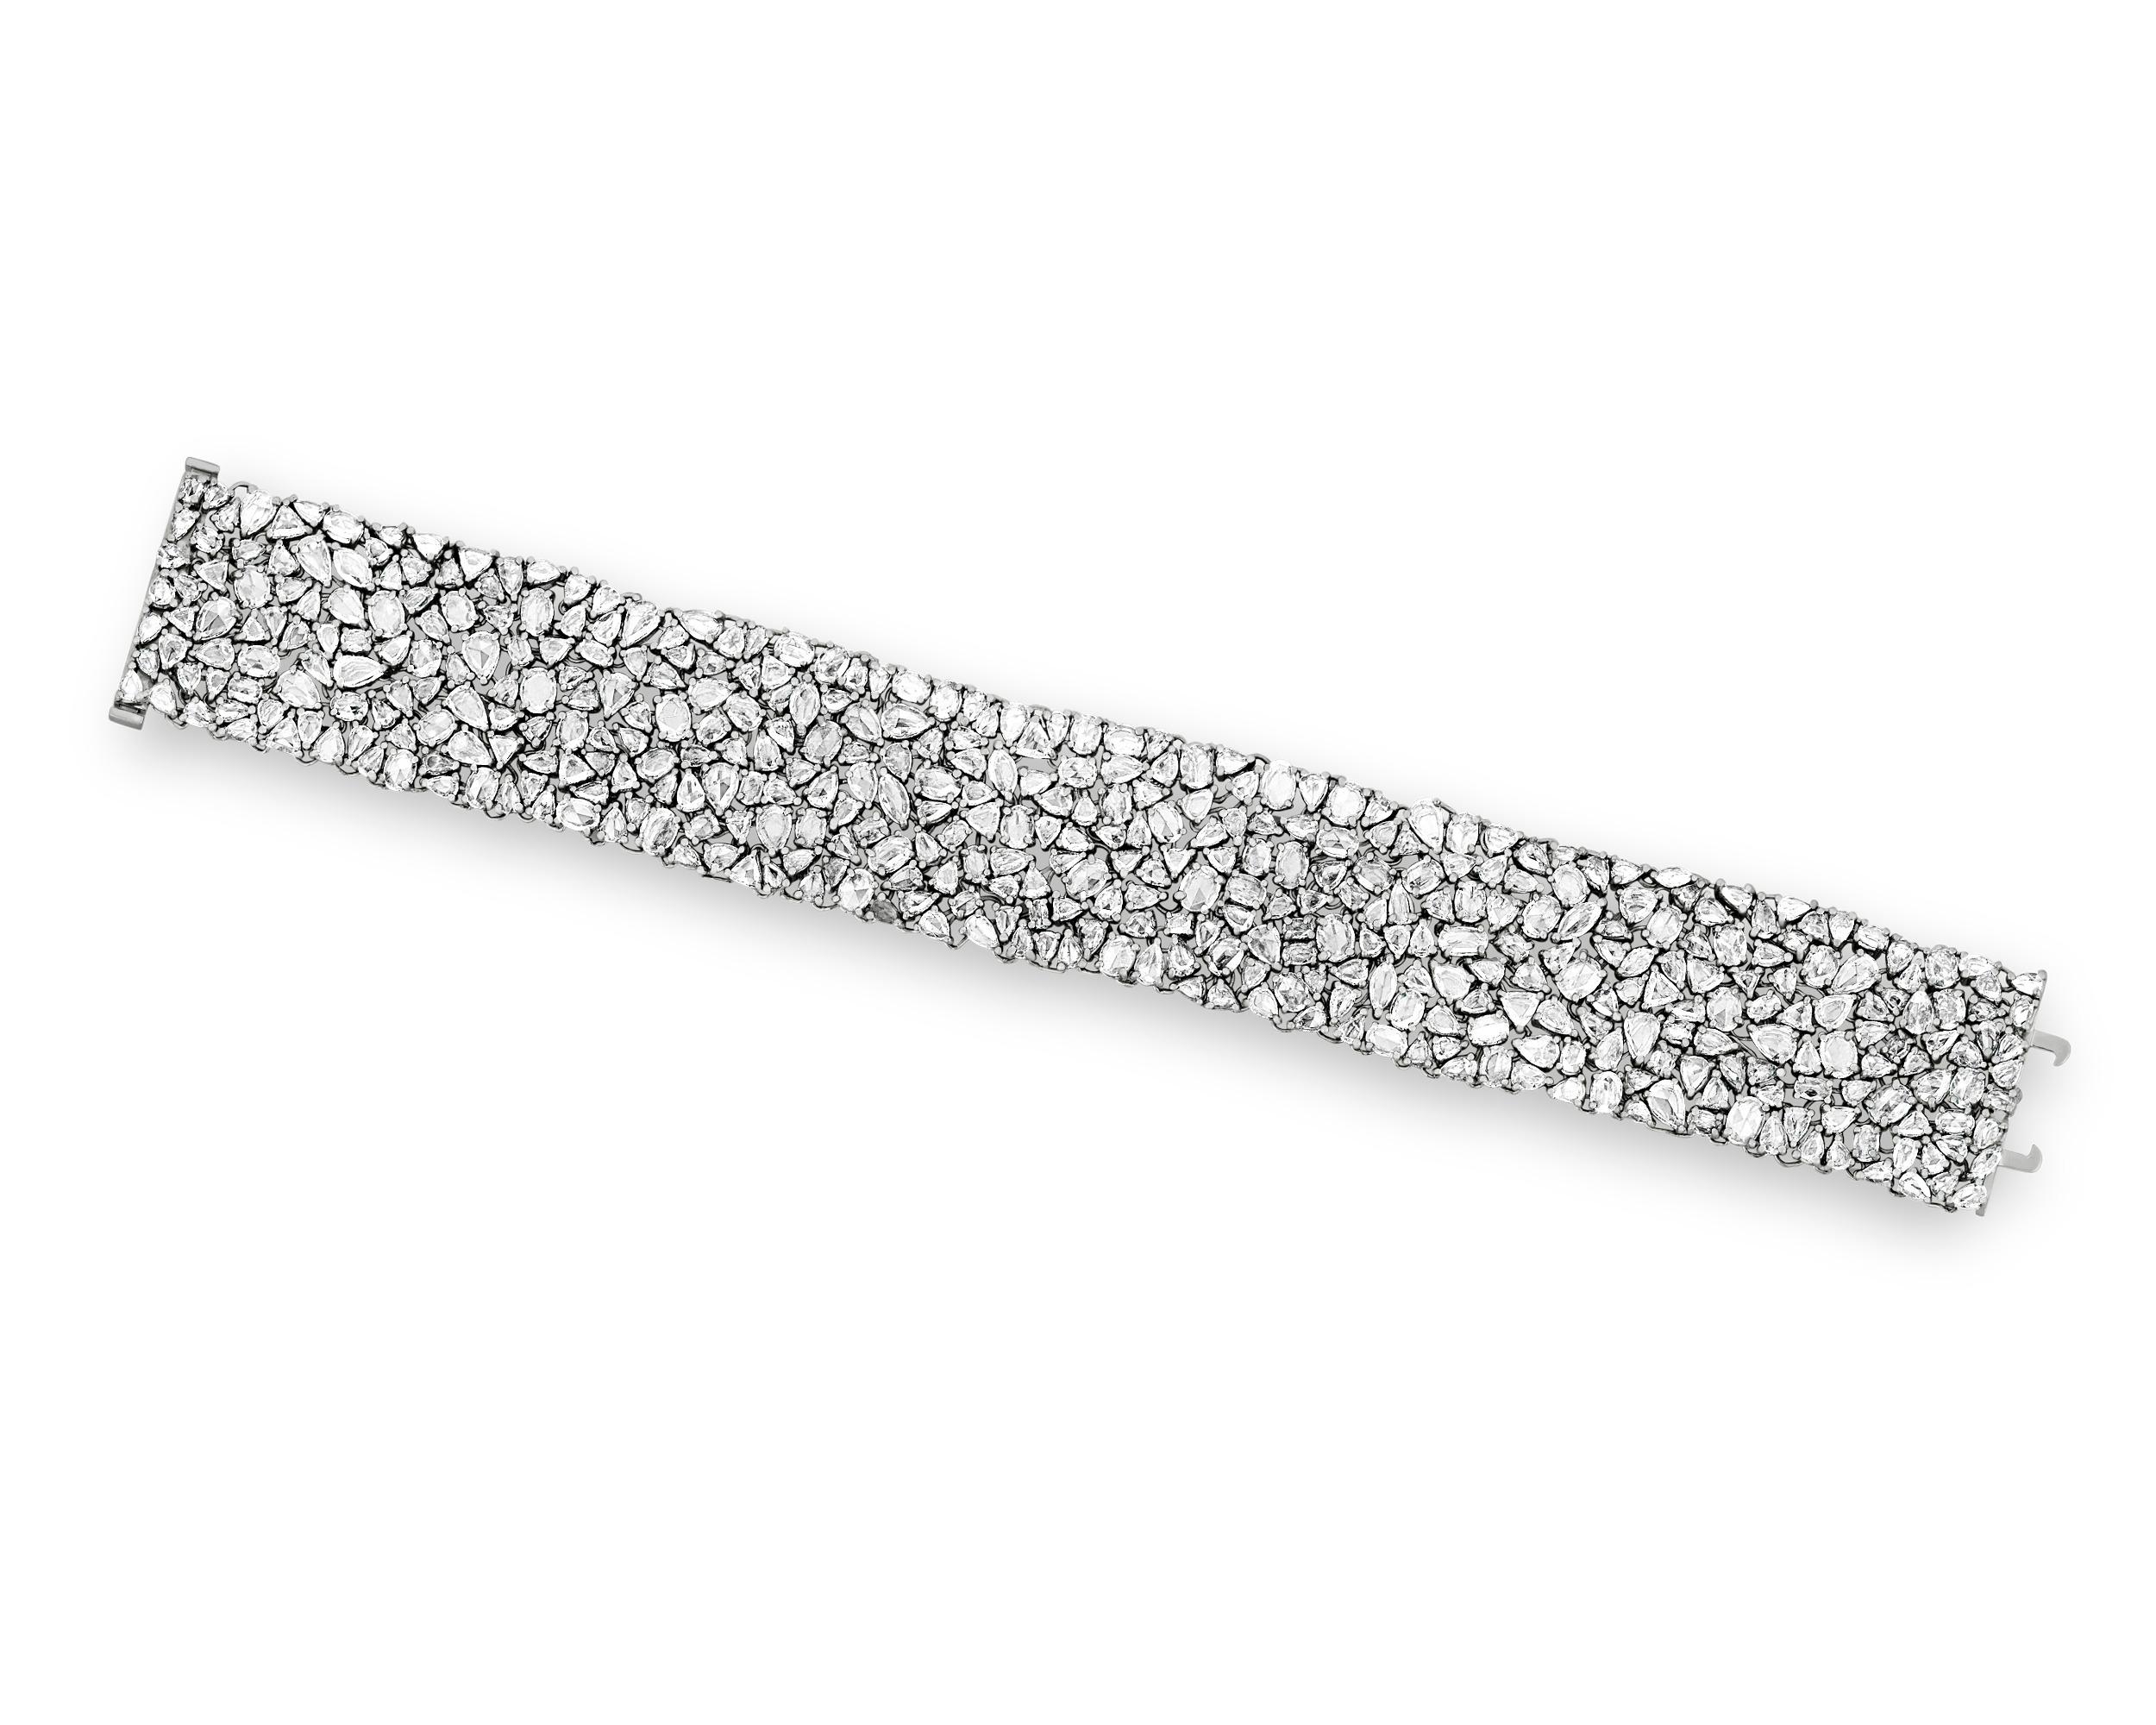 Set with a remarkable 418 rose-cut diamonds totaling 26.61 carats, this bracelet reflects an abundance of light and brilliance with every movement. The rose cut — so named because it resembles the petals of a rose — features a simple structure that